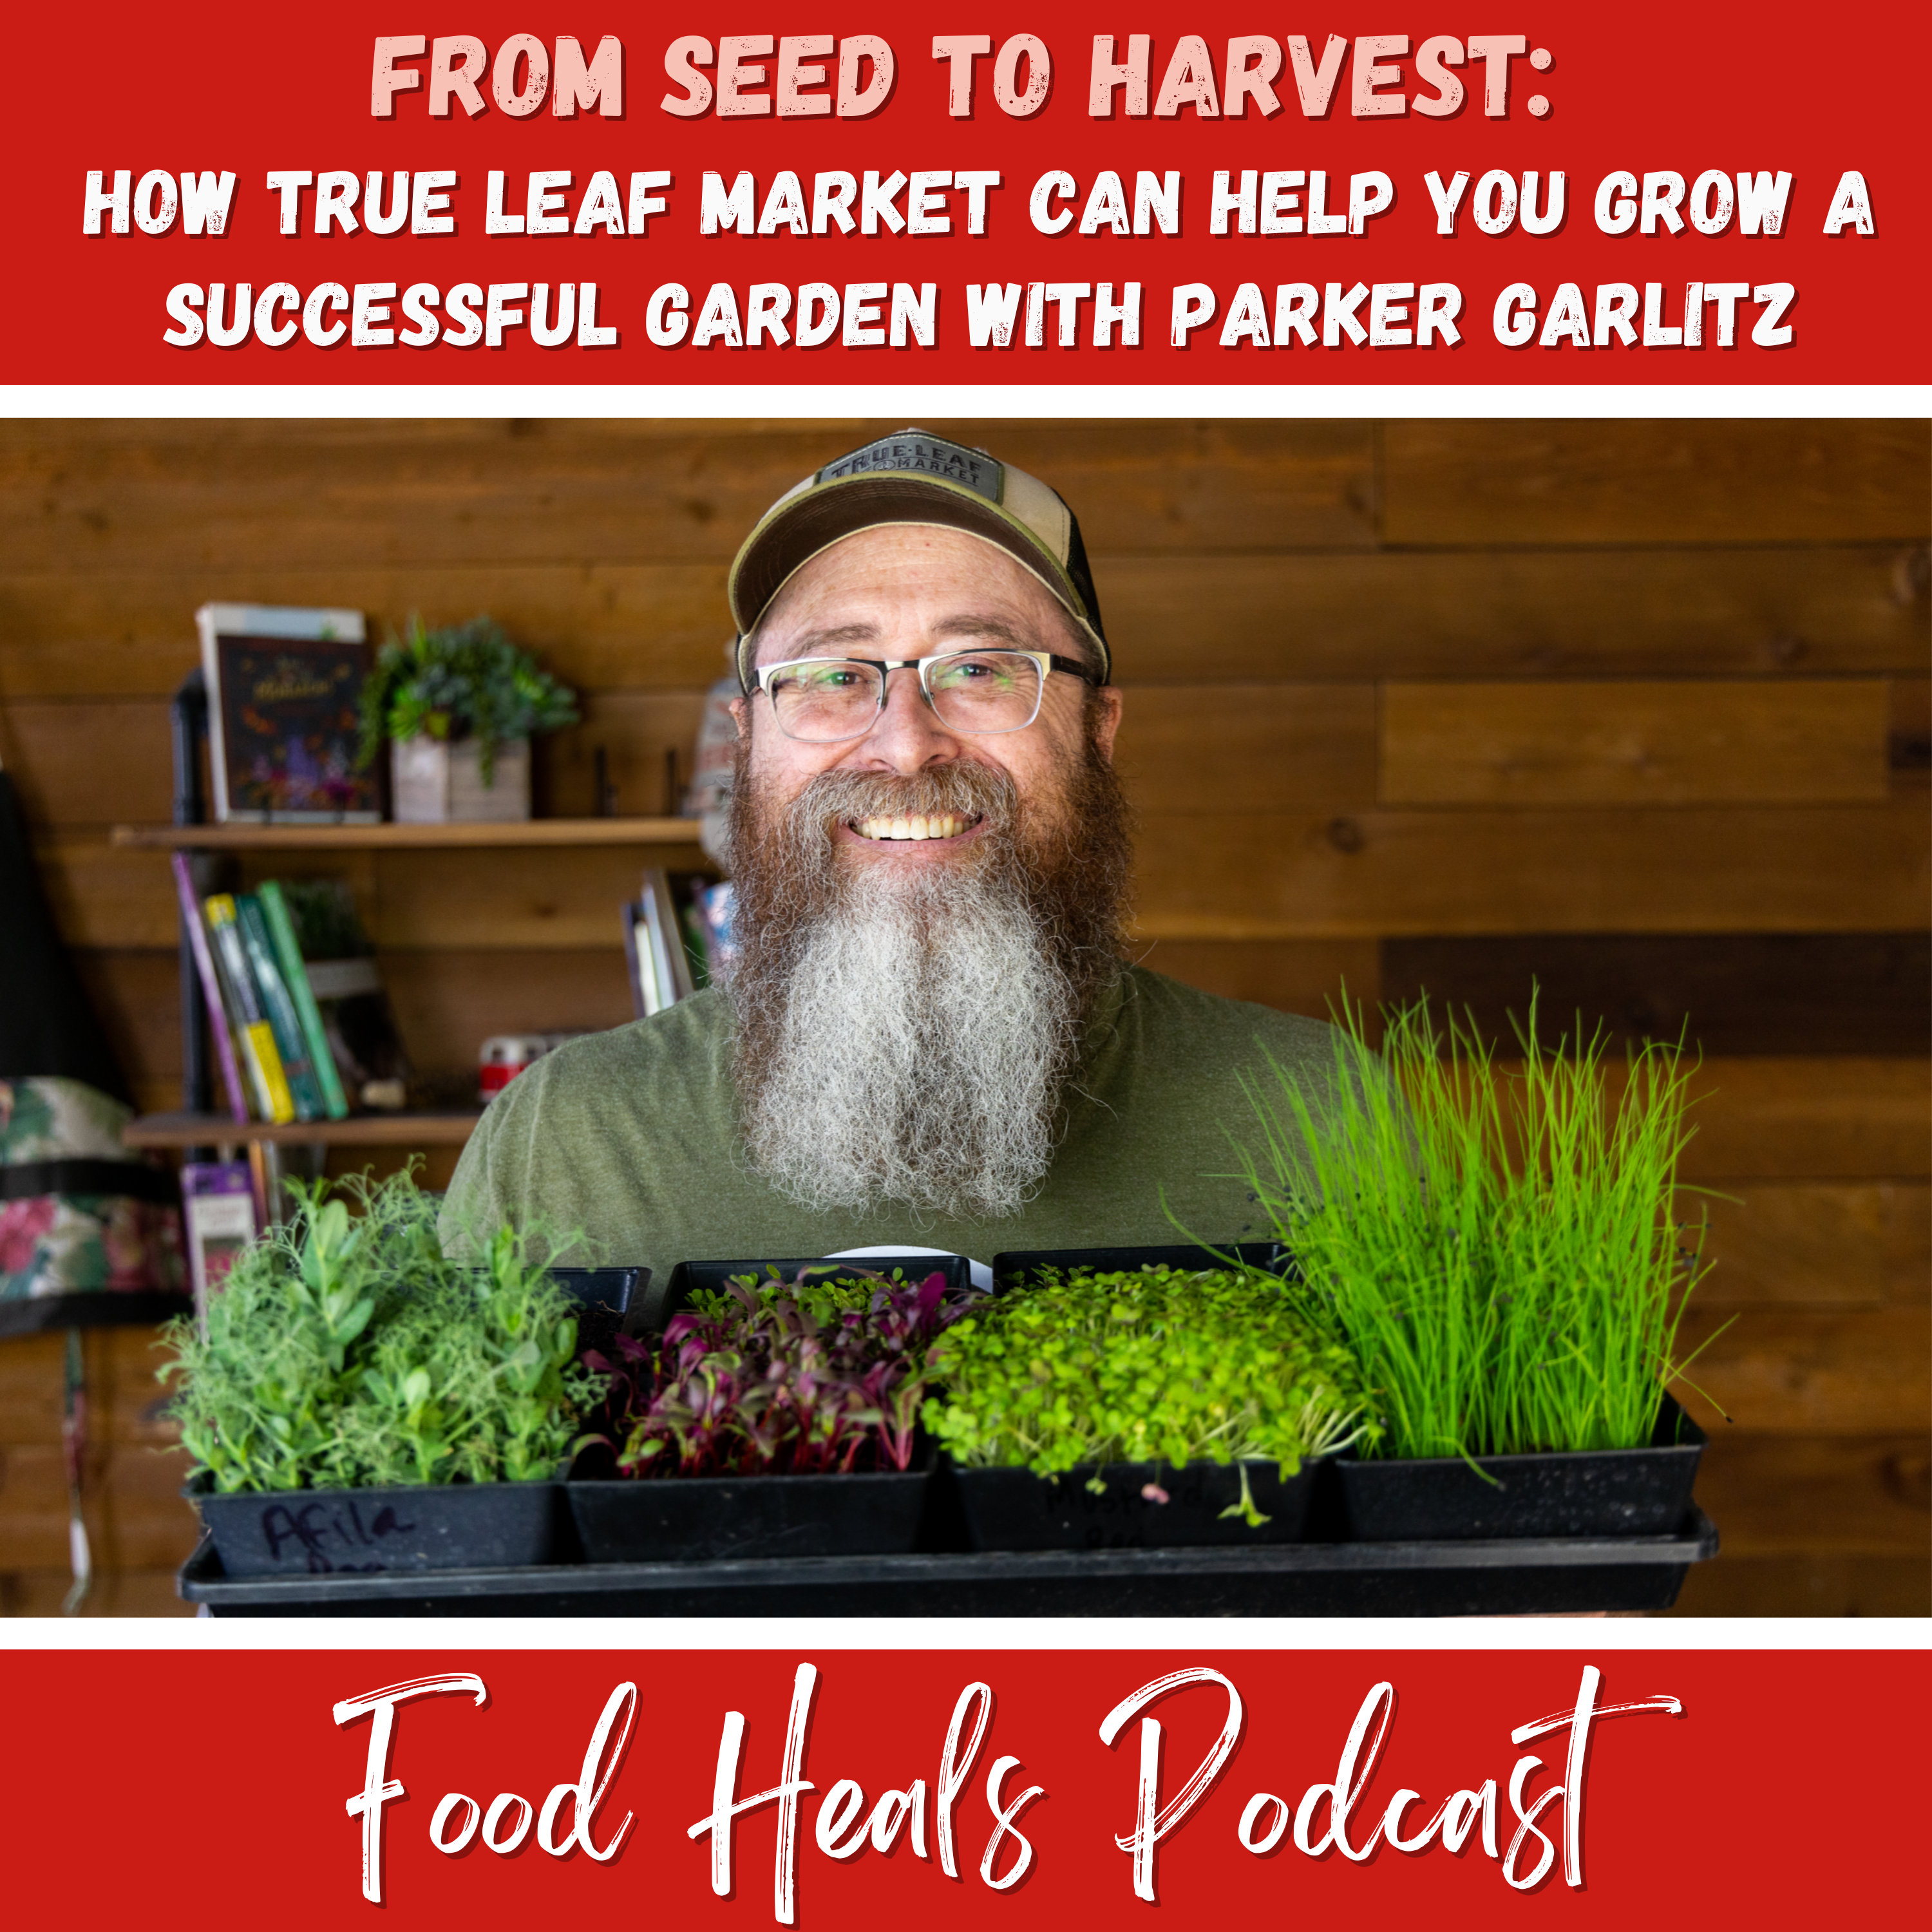 From Seed to Harvest: How True Leaf Market Can Help You Grow a Successful Garden with Parker Garlitz on The Food Heals Podcast